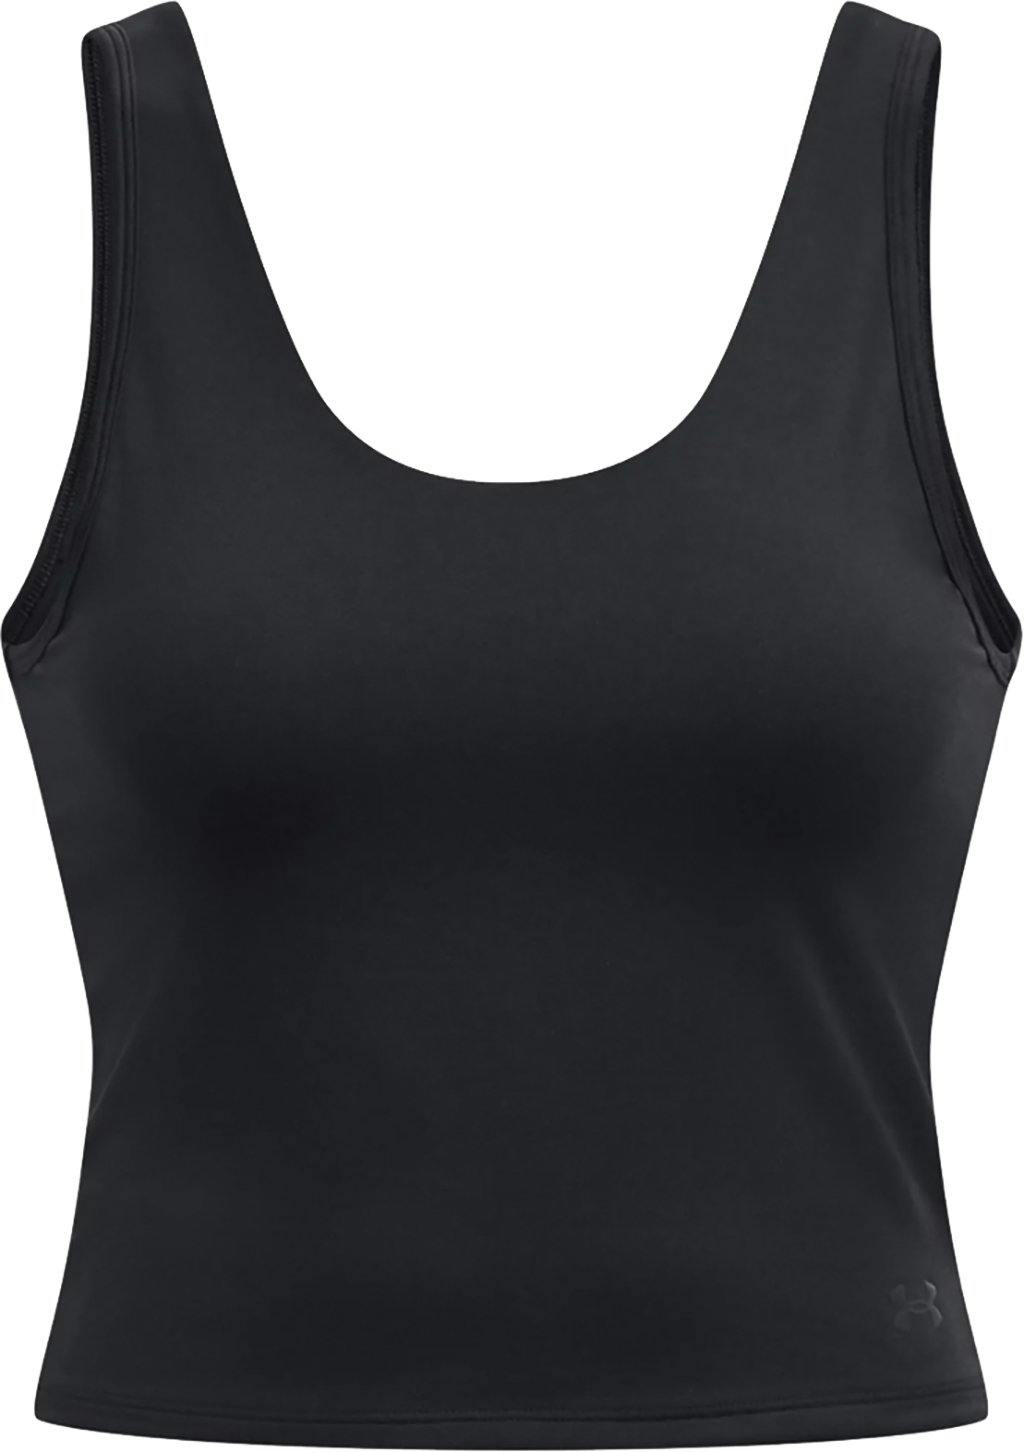 Product image for Motion Tank - Women's